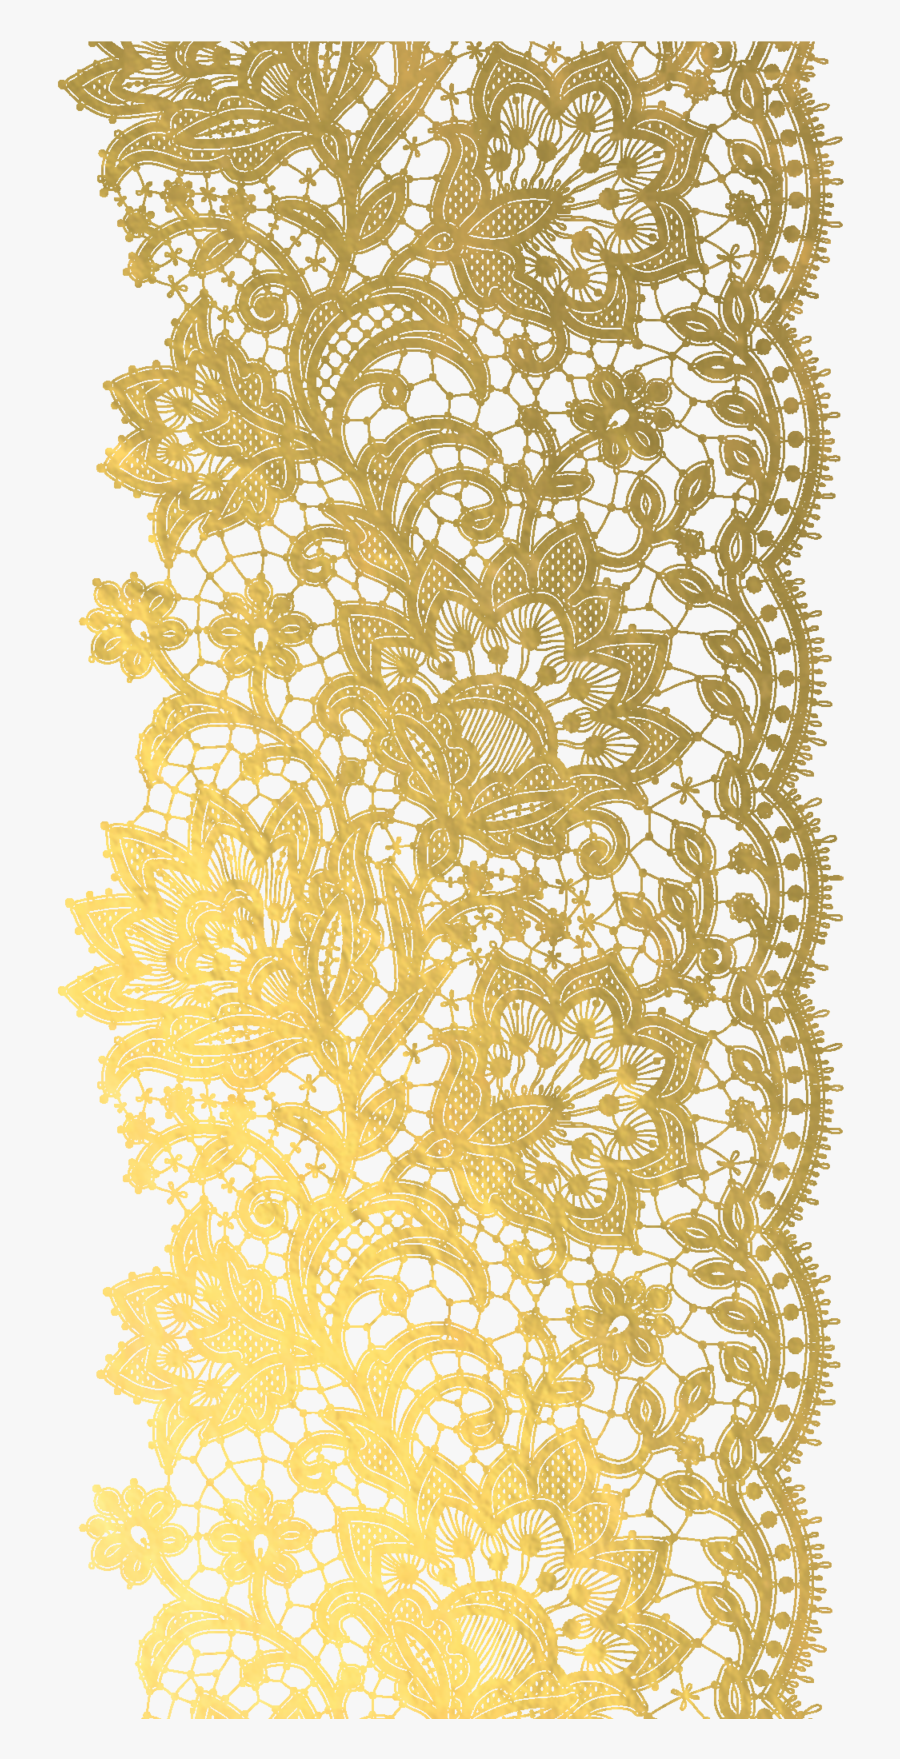 Light Photography Lace Gold Wedding Download Hd Png - Wedding Gold Design Png, Transparent Clipart